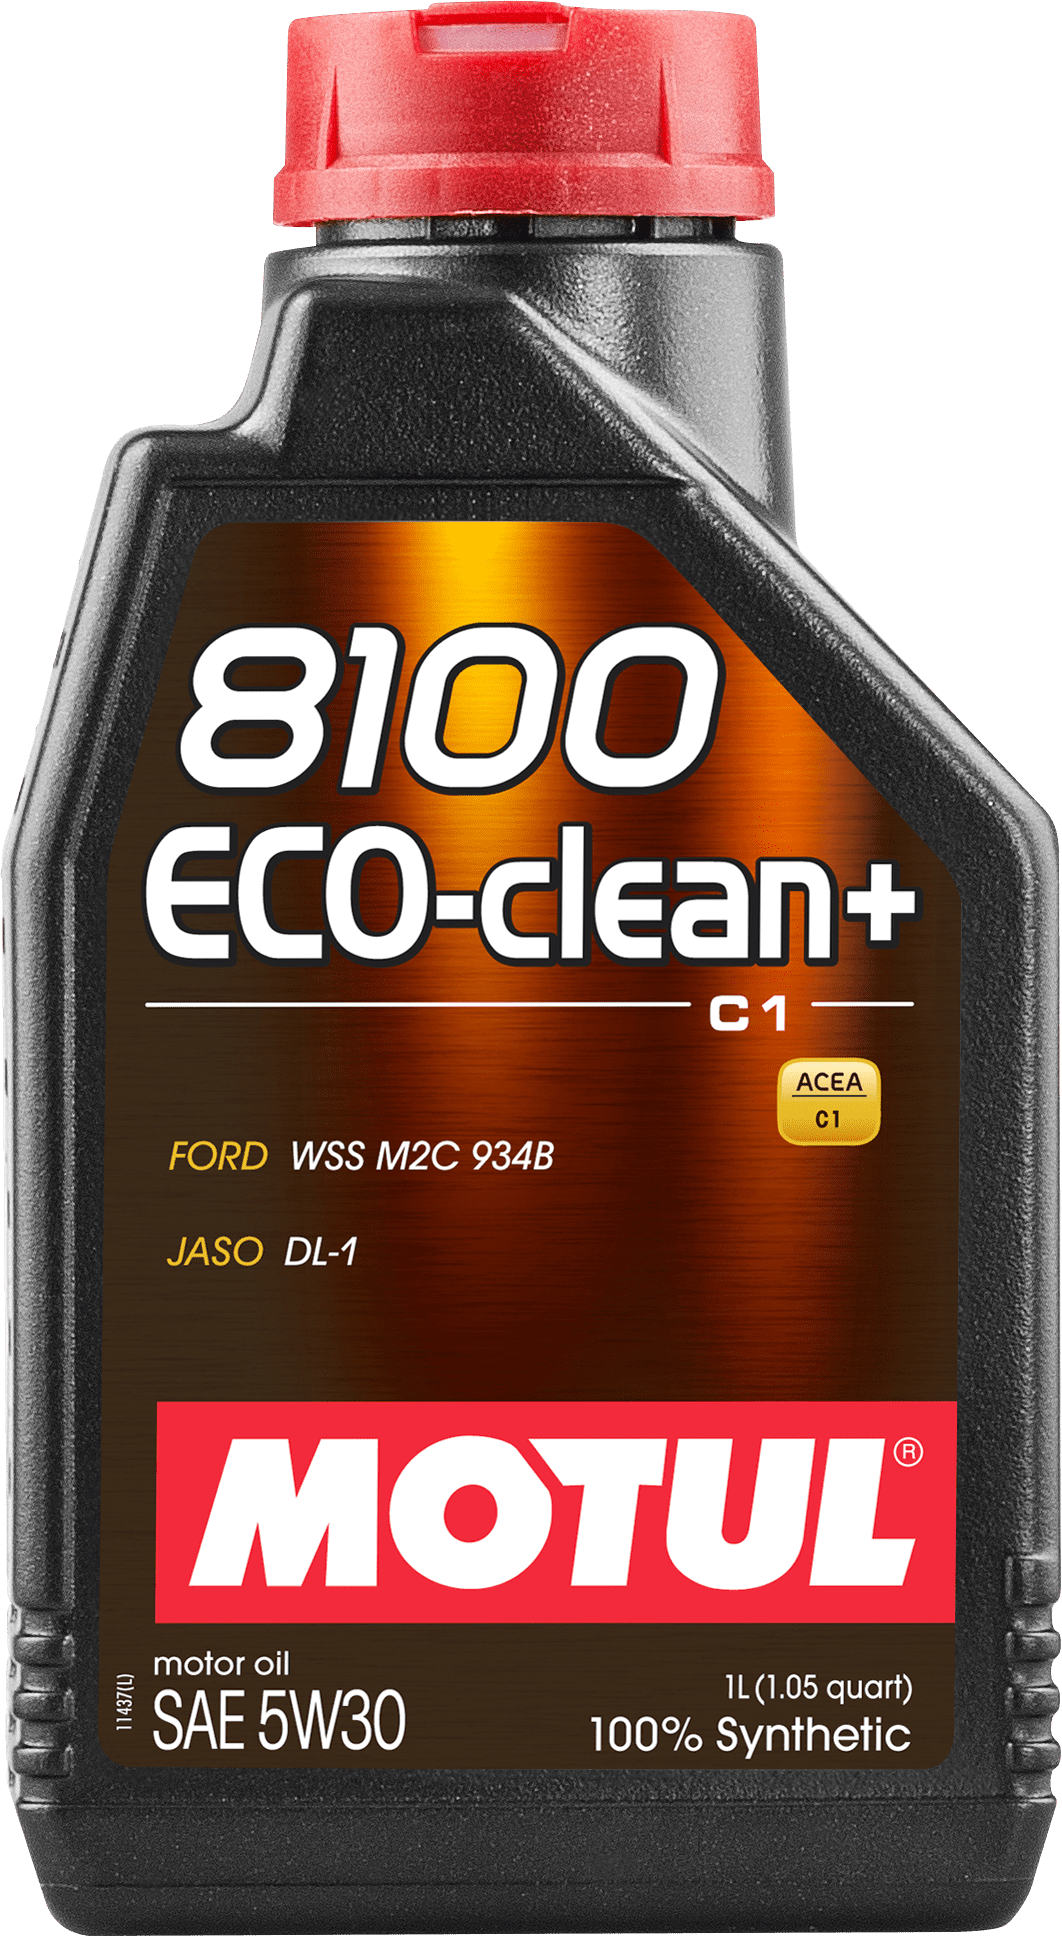 101580-1 100% Synthetic Engine lubricant.